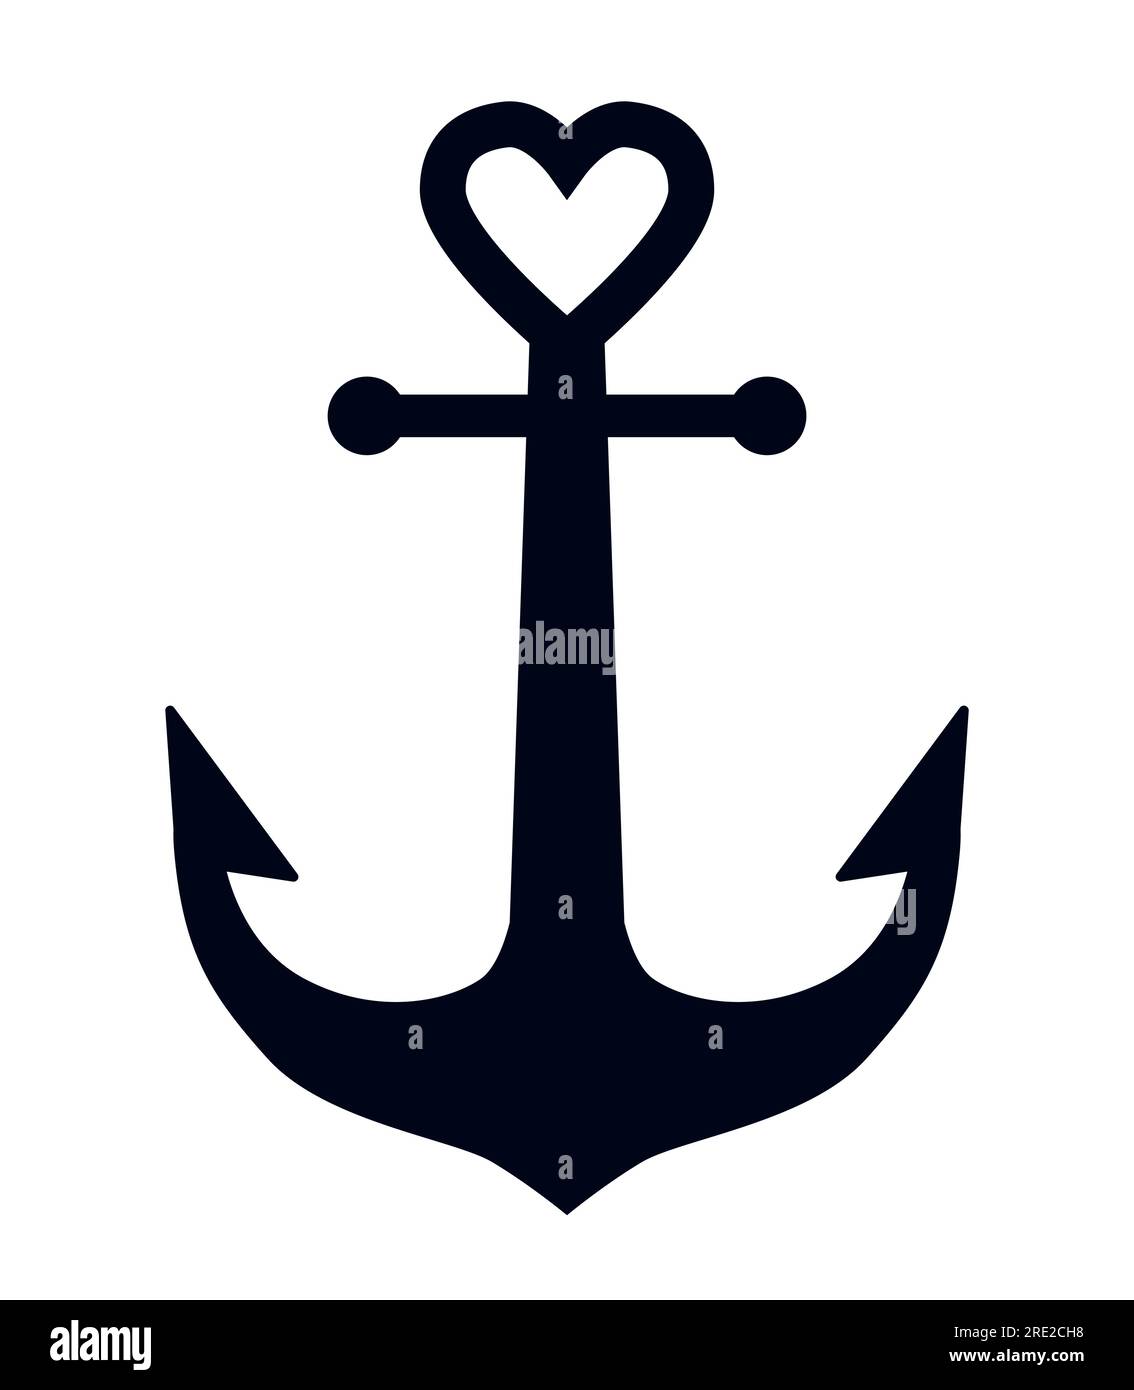 Simple ship anchor with heart symbol boat anchor vector illustration icon Stock Vector